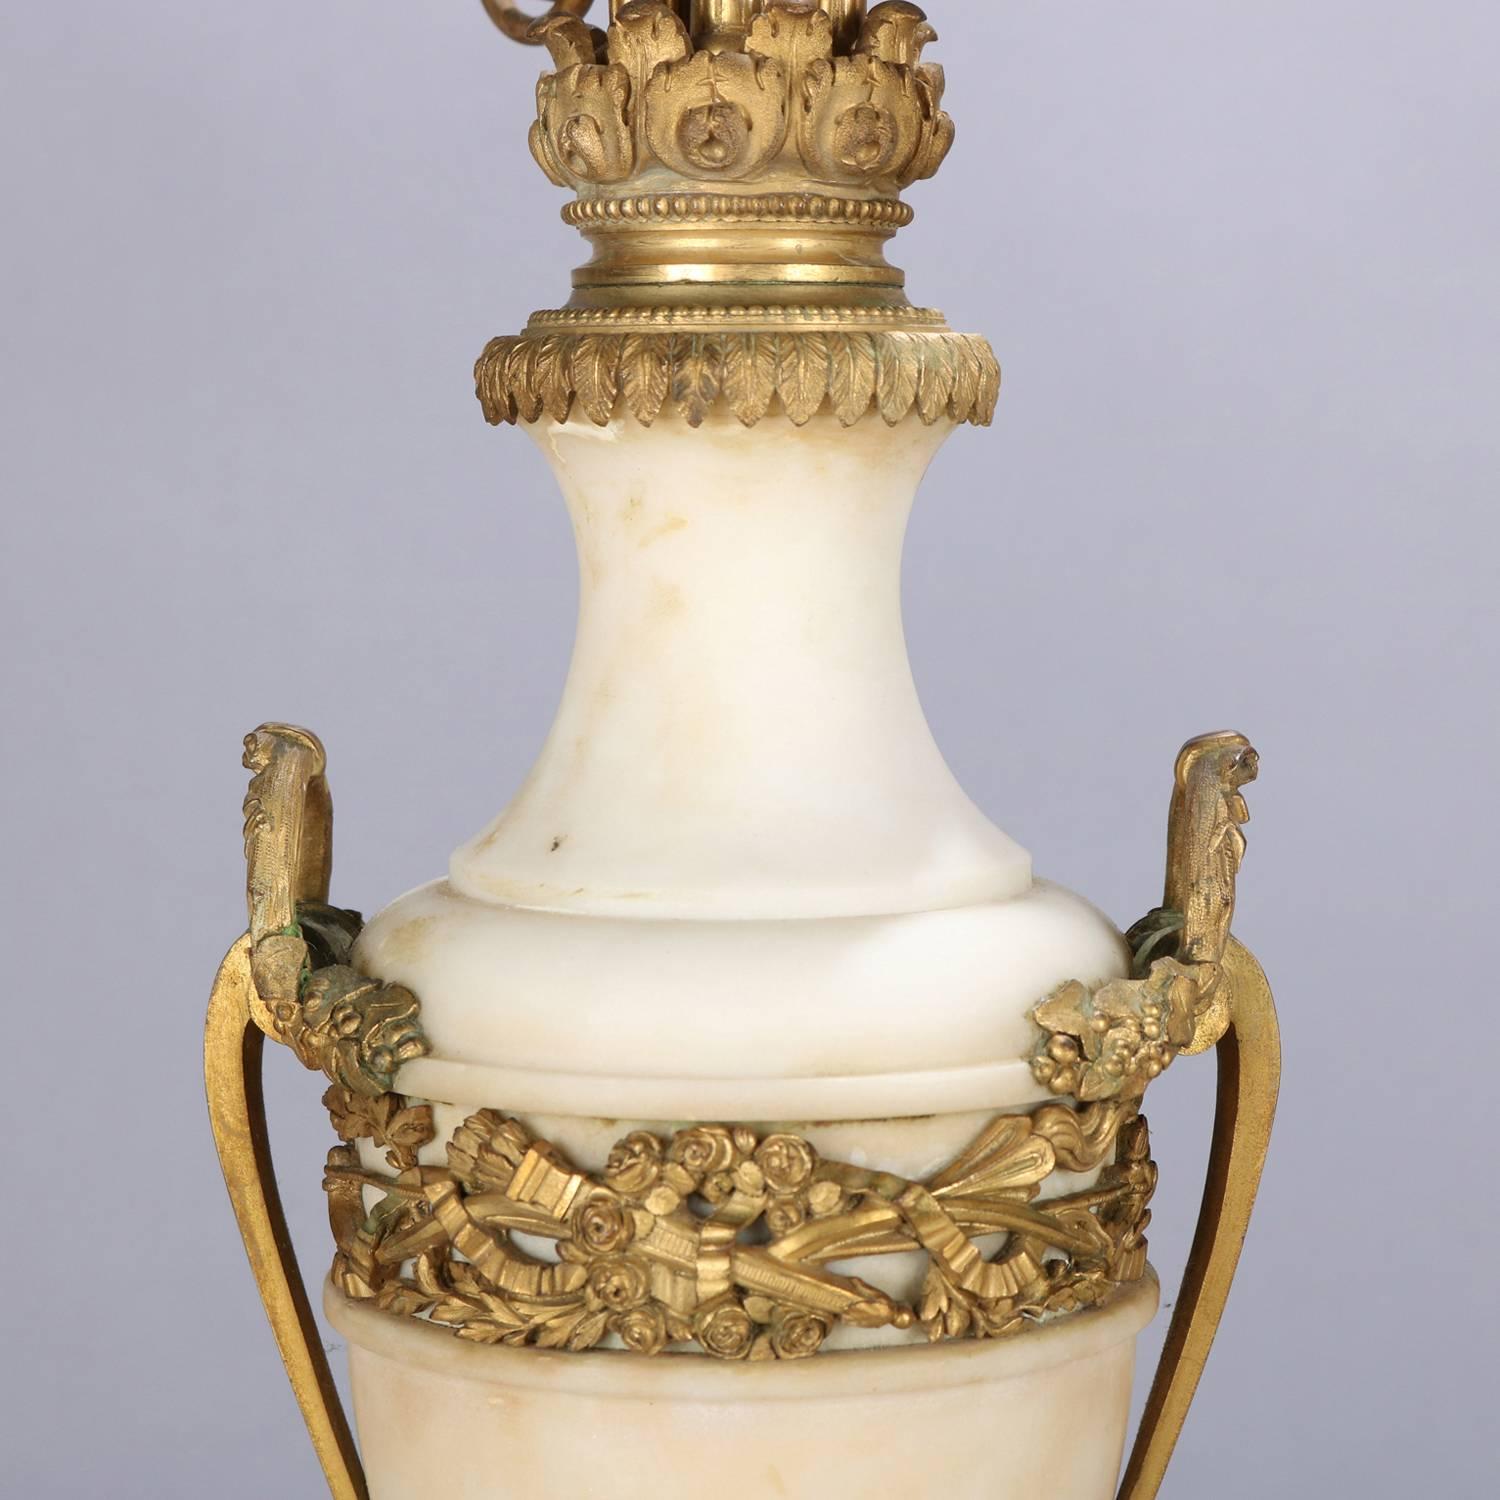 Oversized French Classical Urn Form Marble and Gilt Bronze Candelabras 3